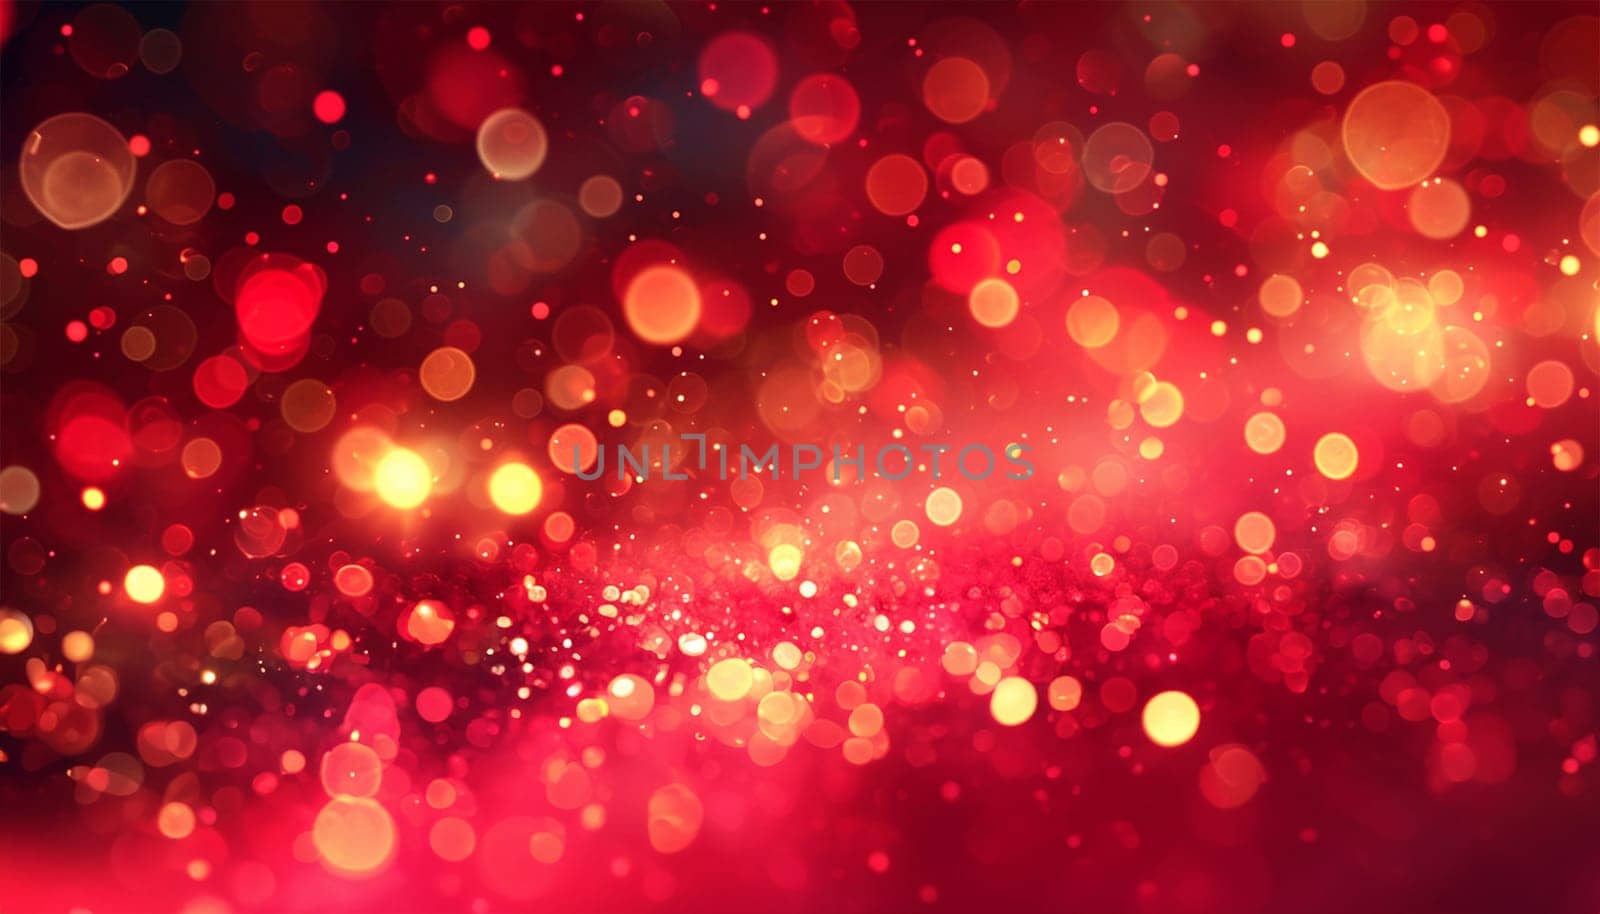 Gold and red particles waves glittering. Red sparkles glitter and rays lights bokeh abstract holiday background texture. Festive abstract design by Annebel146